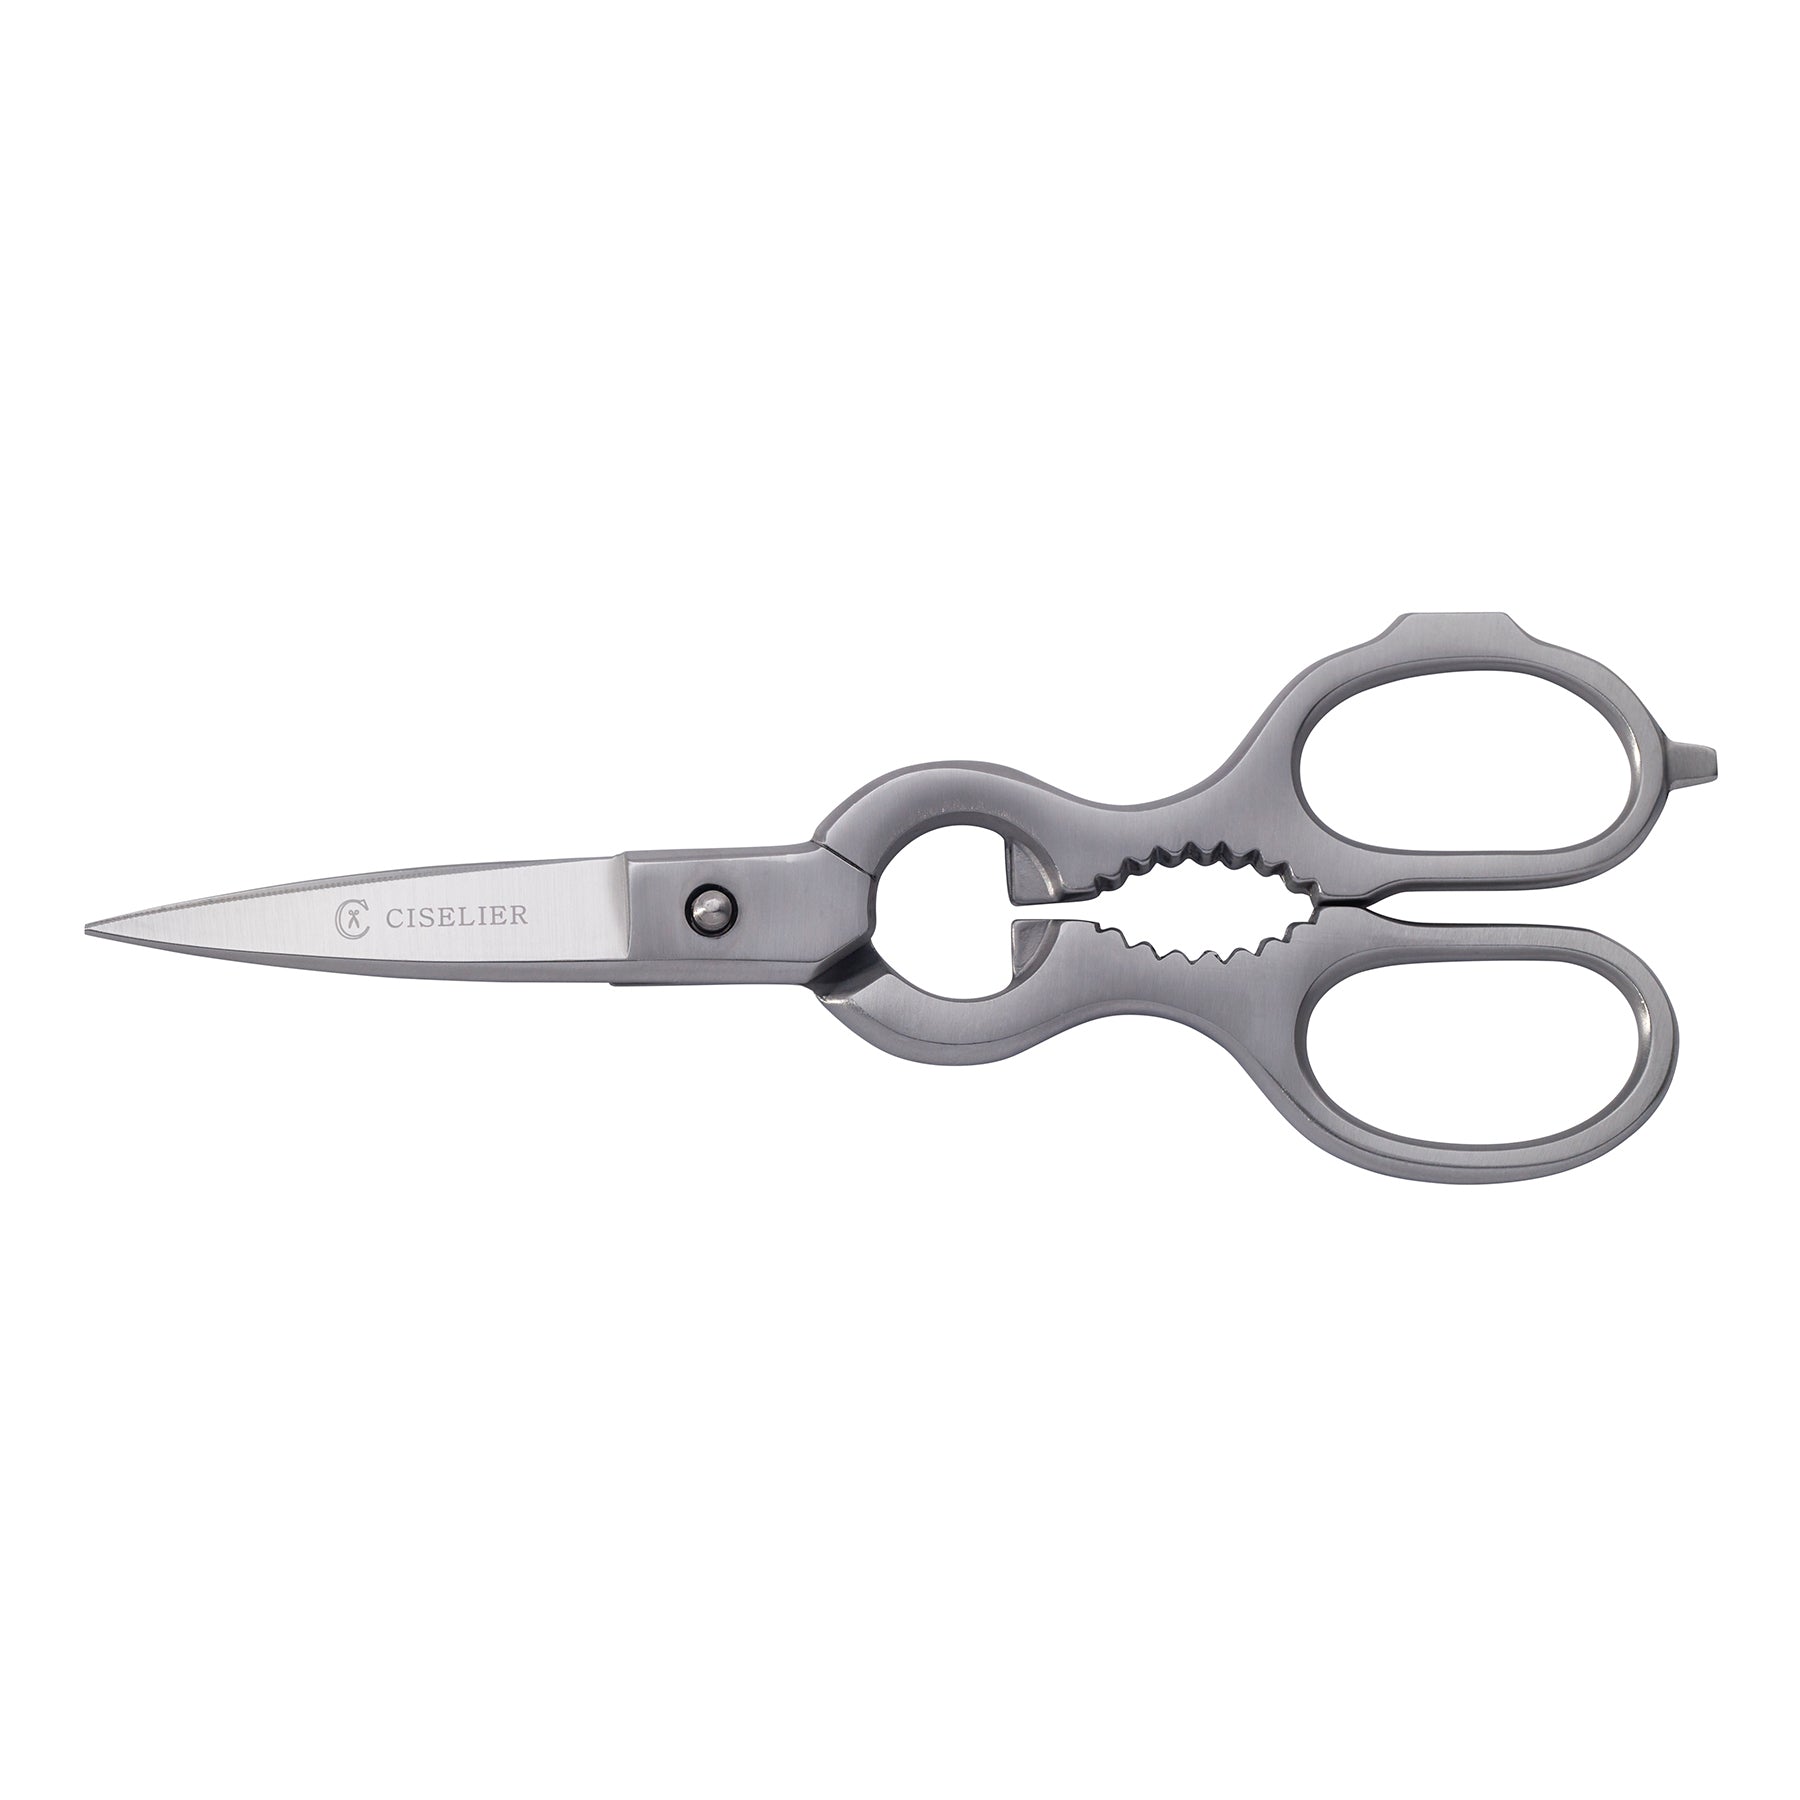 Can using kitchen scissors (properly washed) to cut hair (or vice